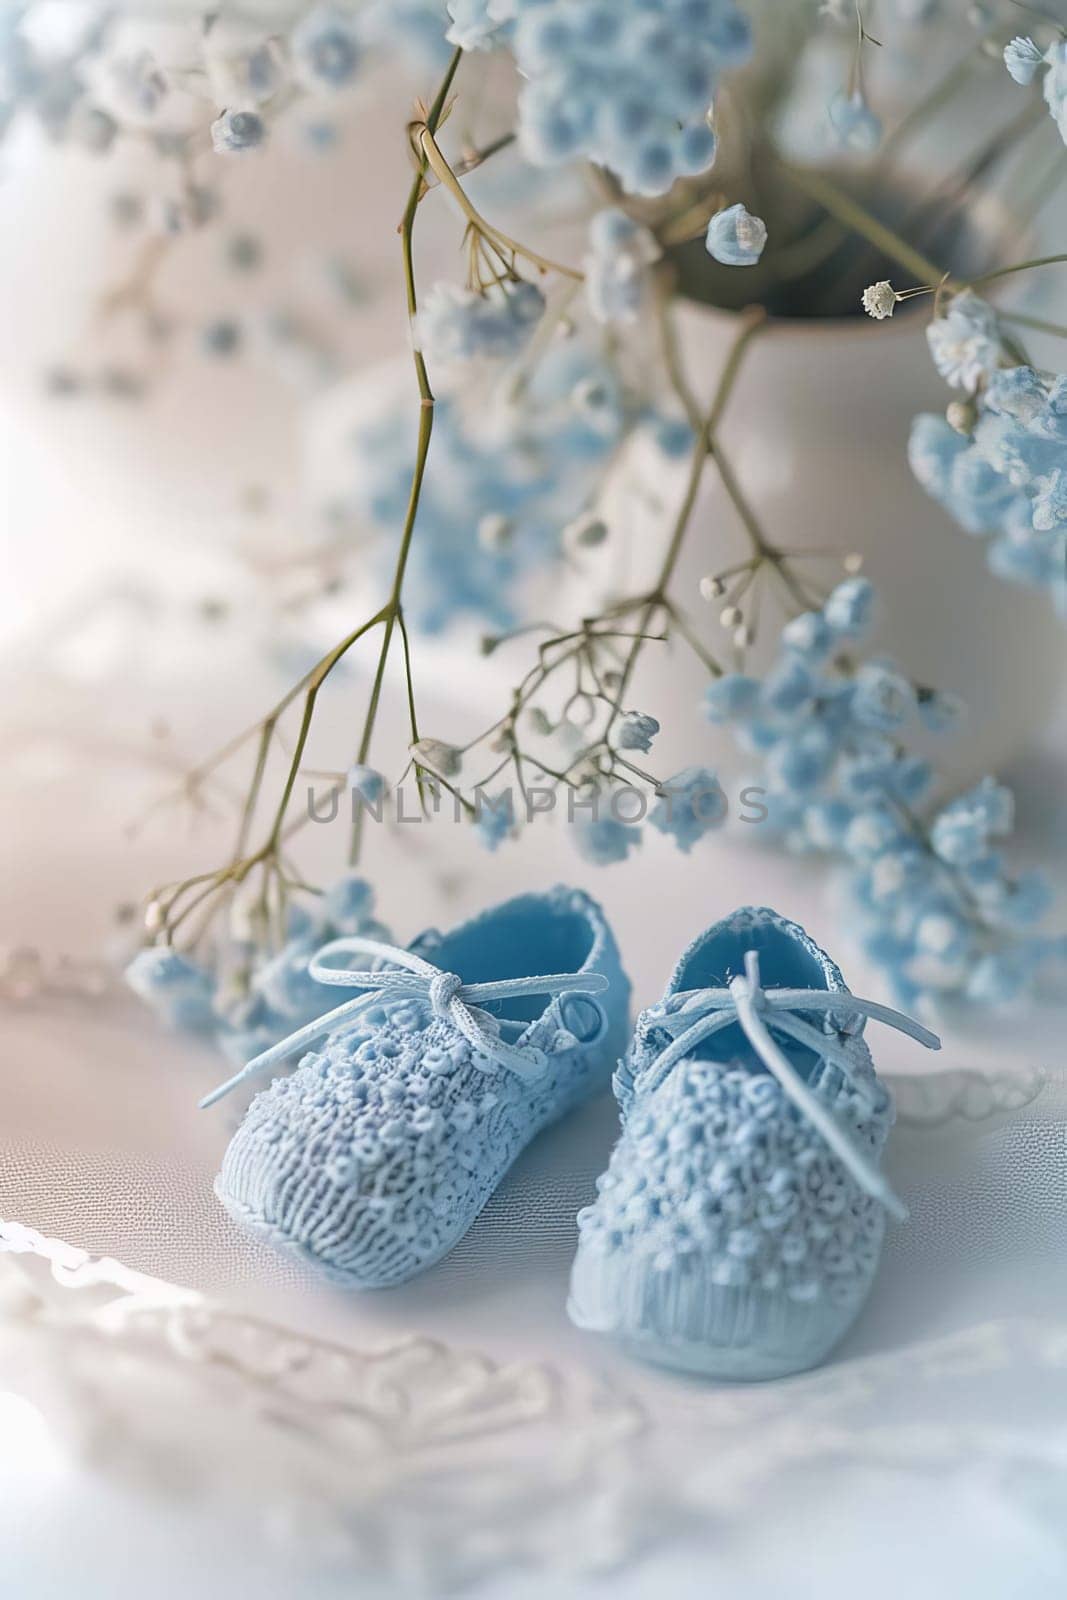 baby booties on a white background. Selective focus. kid.